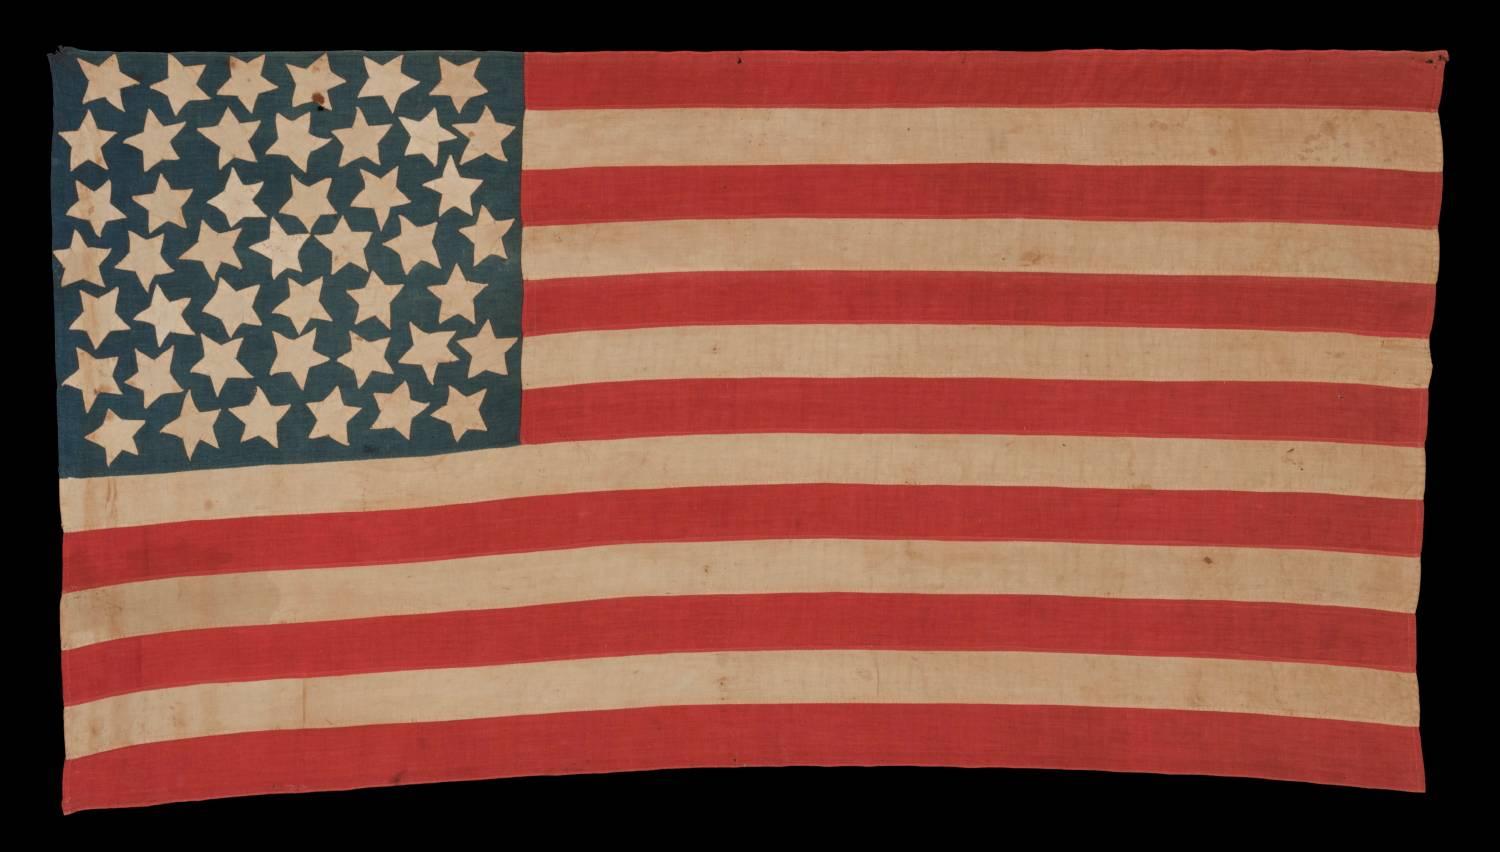 45 HAND-SEWN STARS ON A DENIM BLUE CANTON, WITH GREAT FOLK QUALITIES, ON A HOMEMADE FLAG OF THE 1896-1908 PERIOD, SPANISH-AMERICAN WAR ERA, UTAH STATEHOOD: 

45 star American national flag, made entirely of cotton and exhibiting wonderful folk